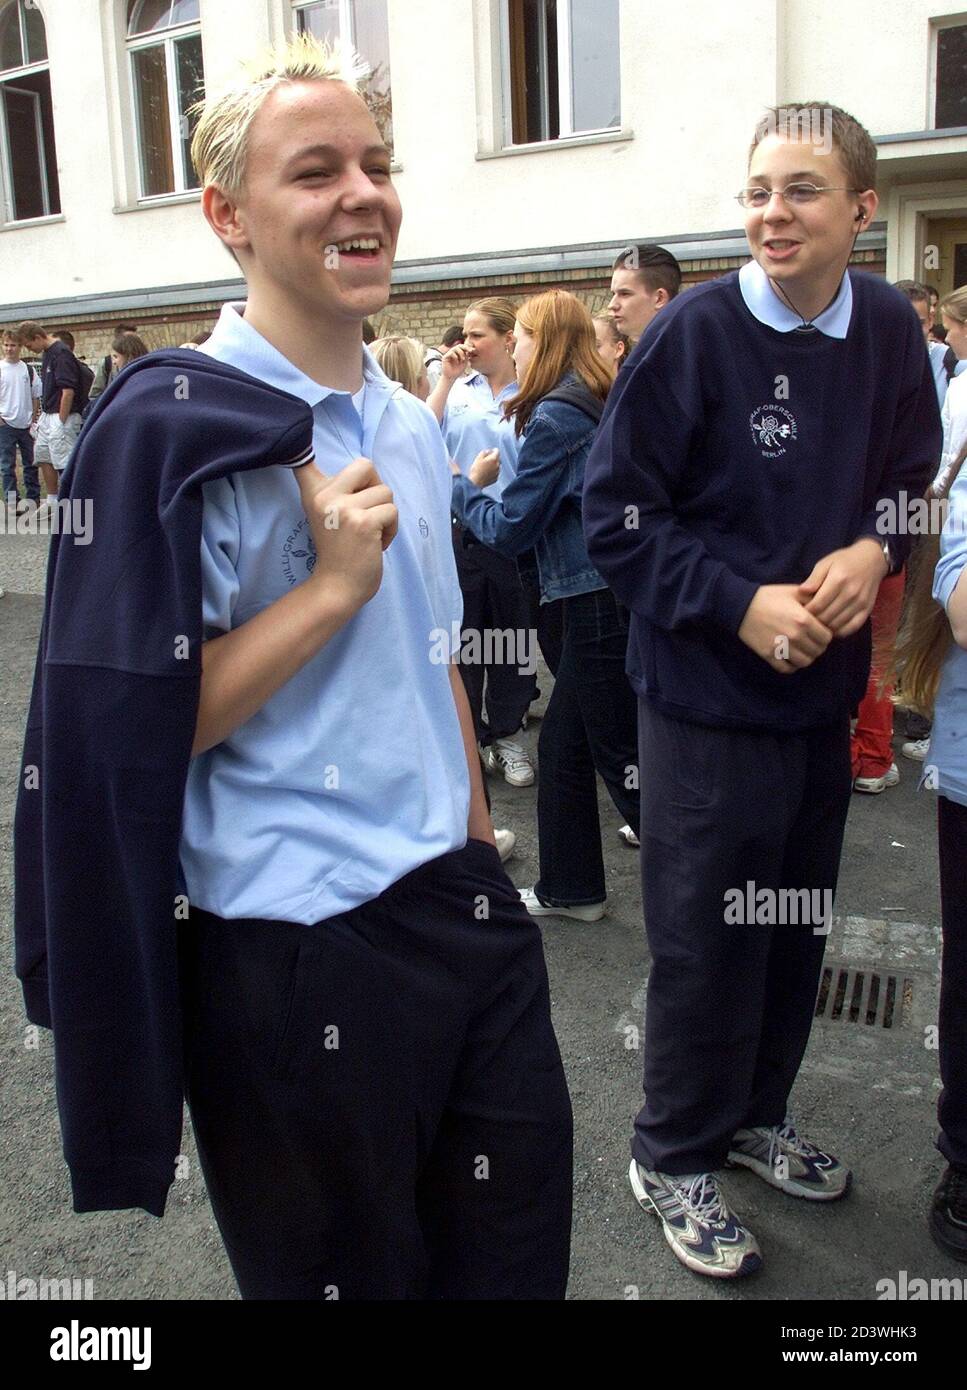 14-year-old Andy Benn (L) jokes around with a class mate, as they wear their brand new school uniform, which is being piloted at the Willi-Graf-Oberschule in Berlin May 21, 2001. The uniform trial starts today in two classes of this school and runs until the beginning of the summer holidays. Pupils at German state schools do not wear uniforms.  AX/JOH Stock Photo